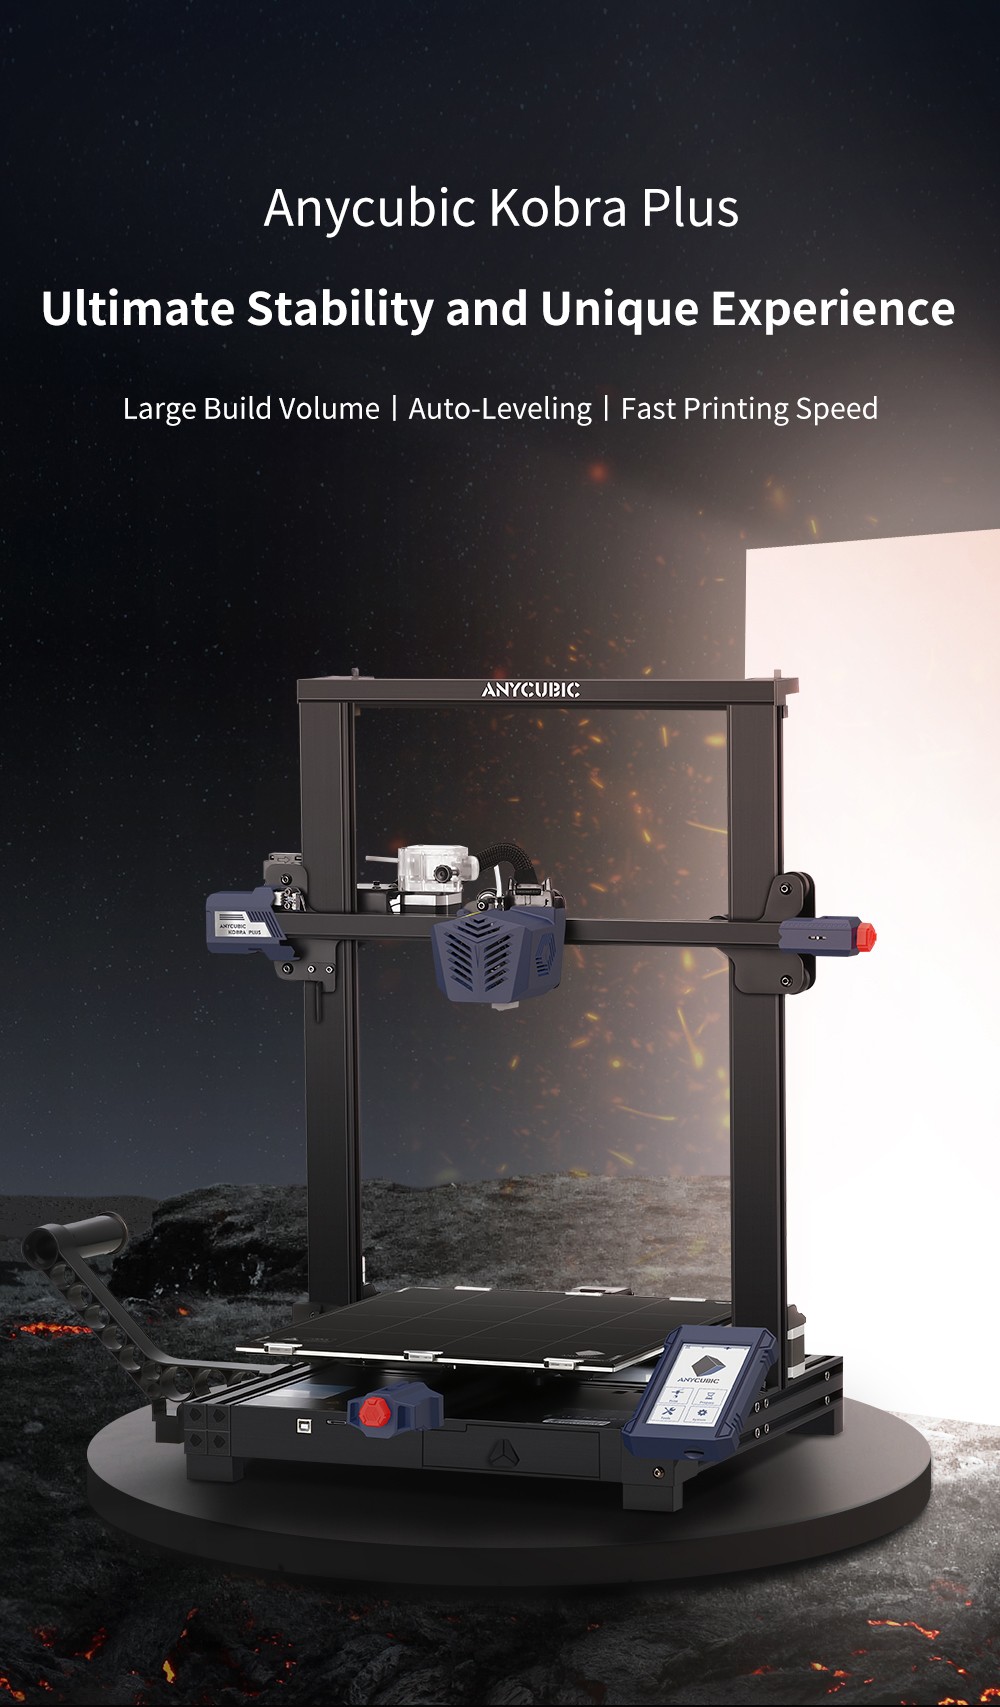 Anycubic Kobra Plus 3D Printer, 25-point Auto Leveling, Bowden Extruder, 4.3 inch Display, 180mm/s Speed, 350x300x300mm